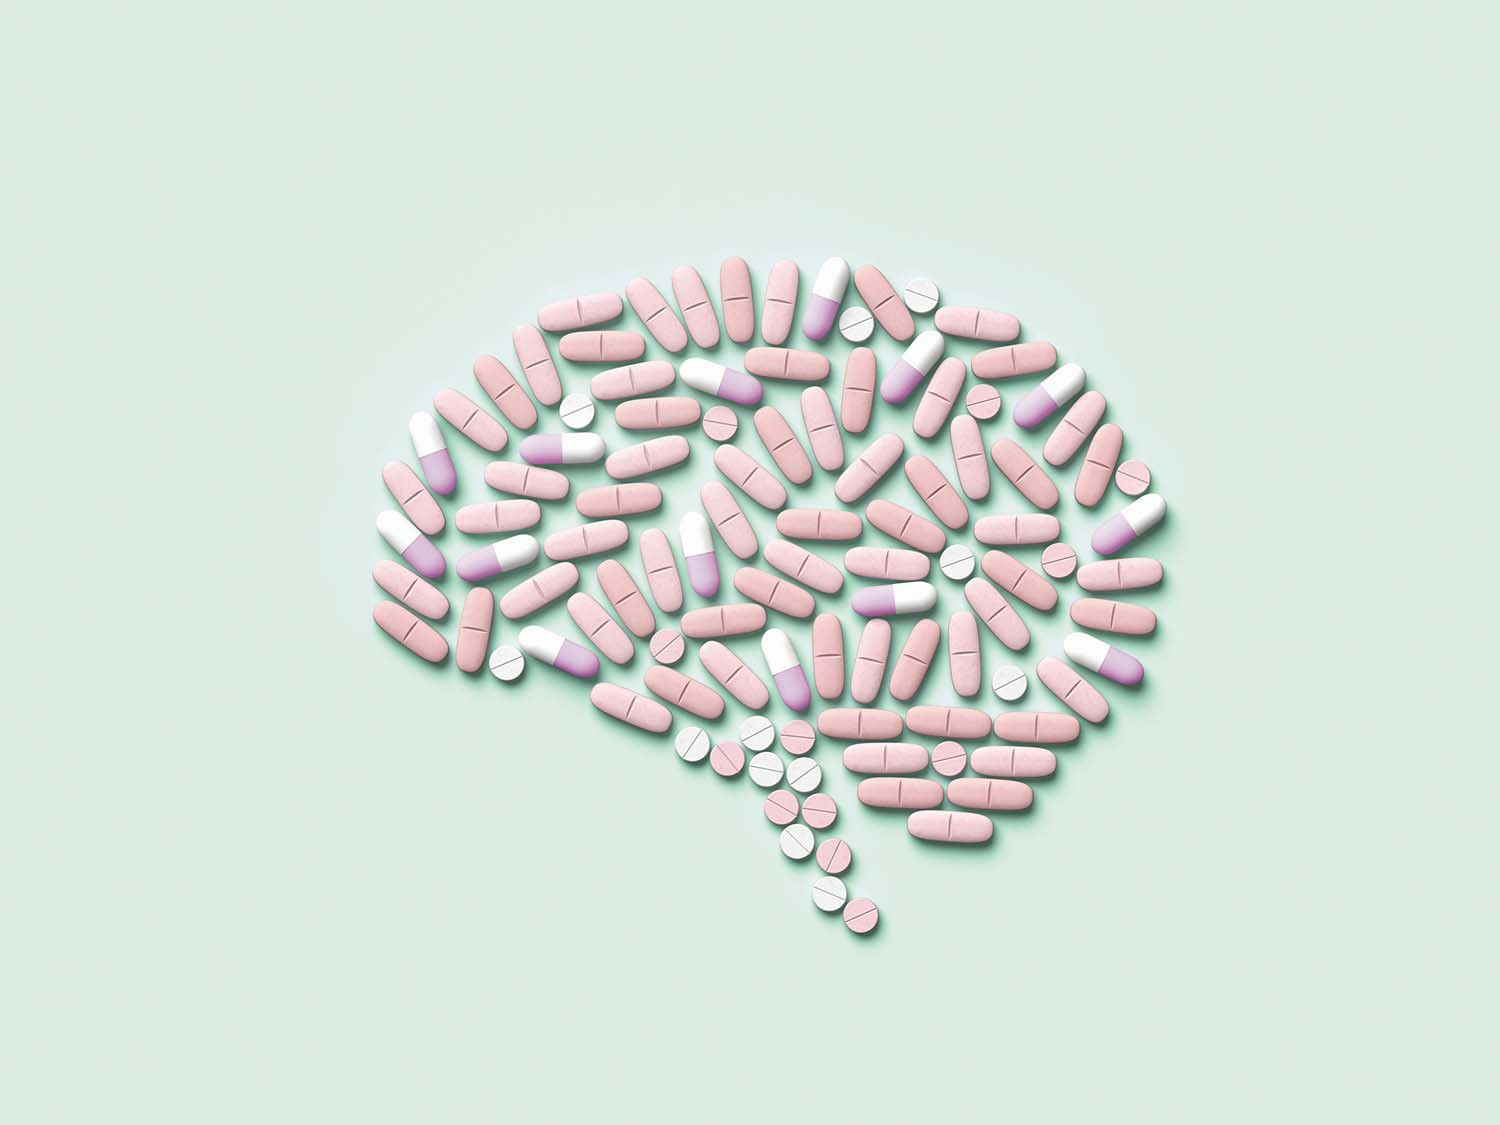 photo of an assortment of pills arranged into the shape of a human brain, on a light green background